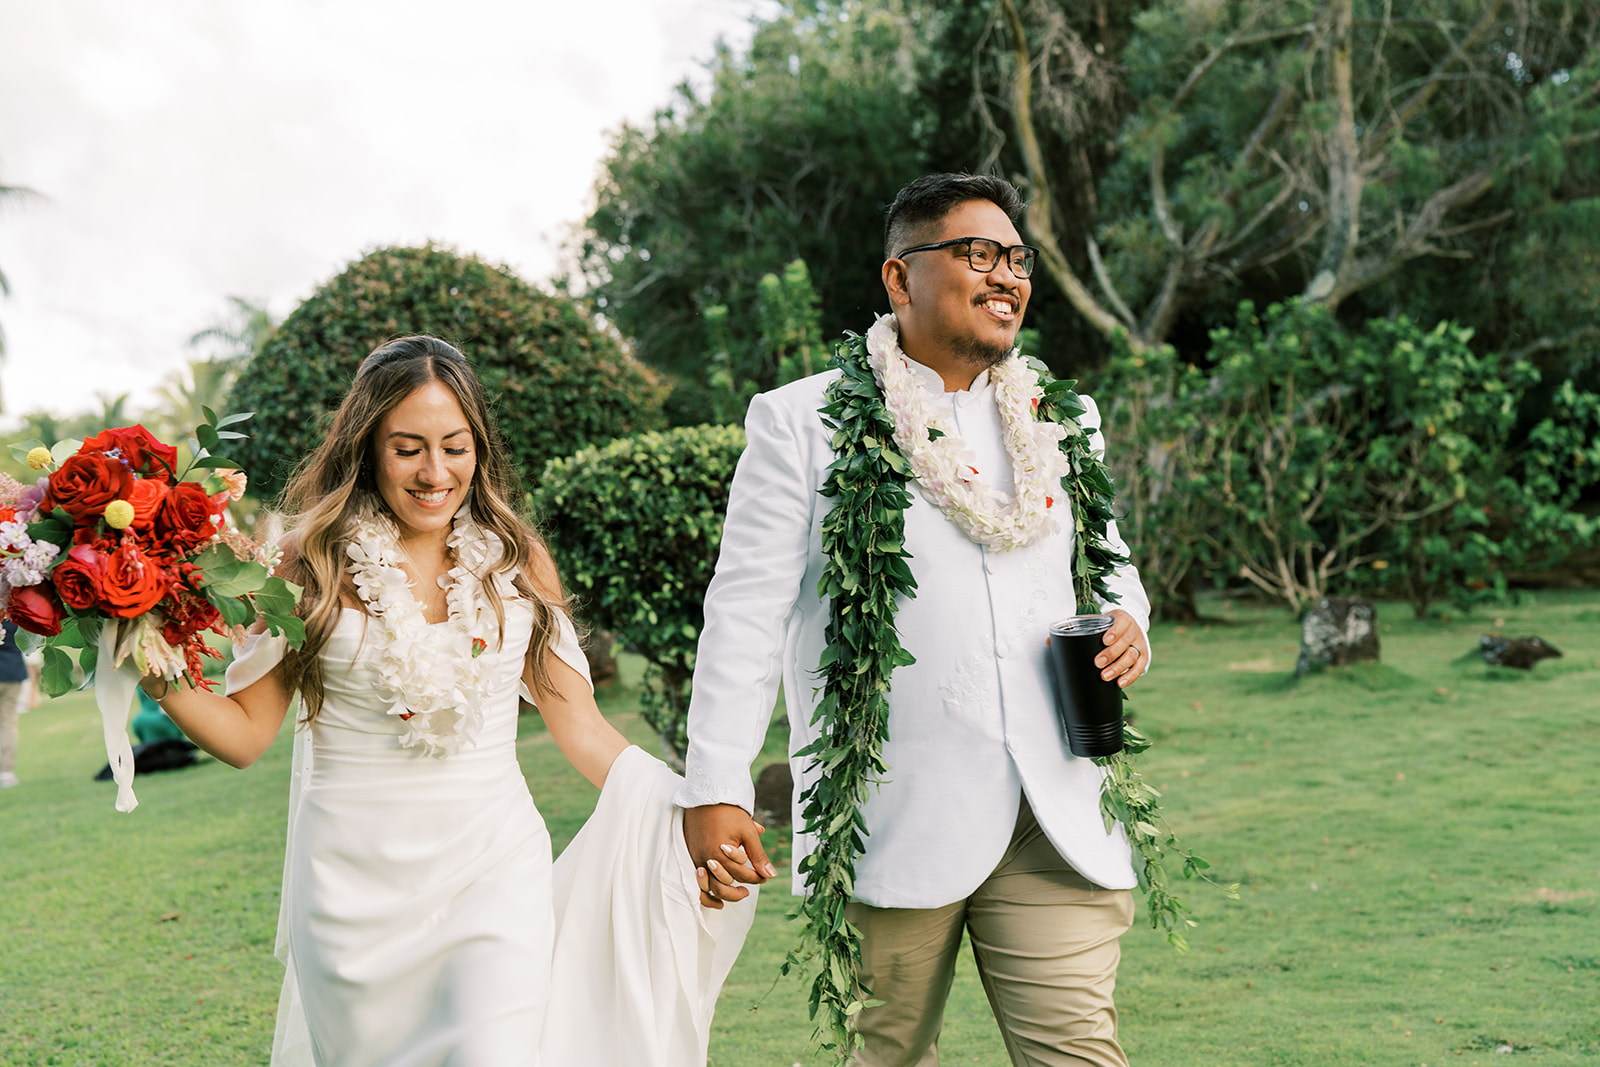 Bride and groom holding hands and walking on a grassy field, both wearing leis and smiling during their Hawaiian Wedding